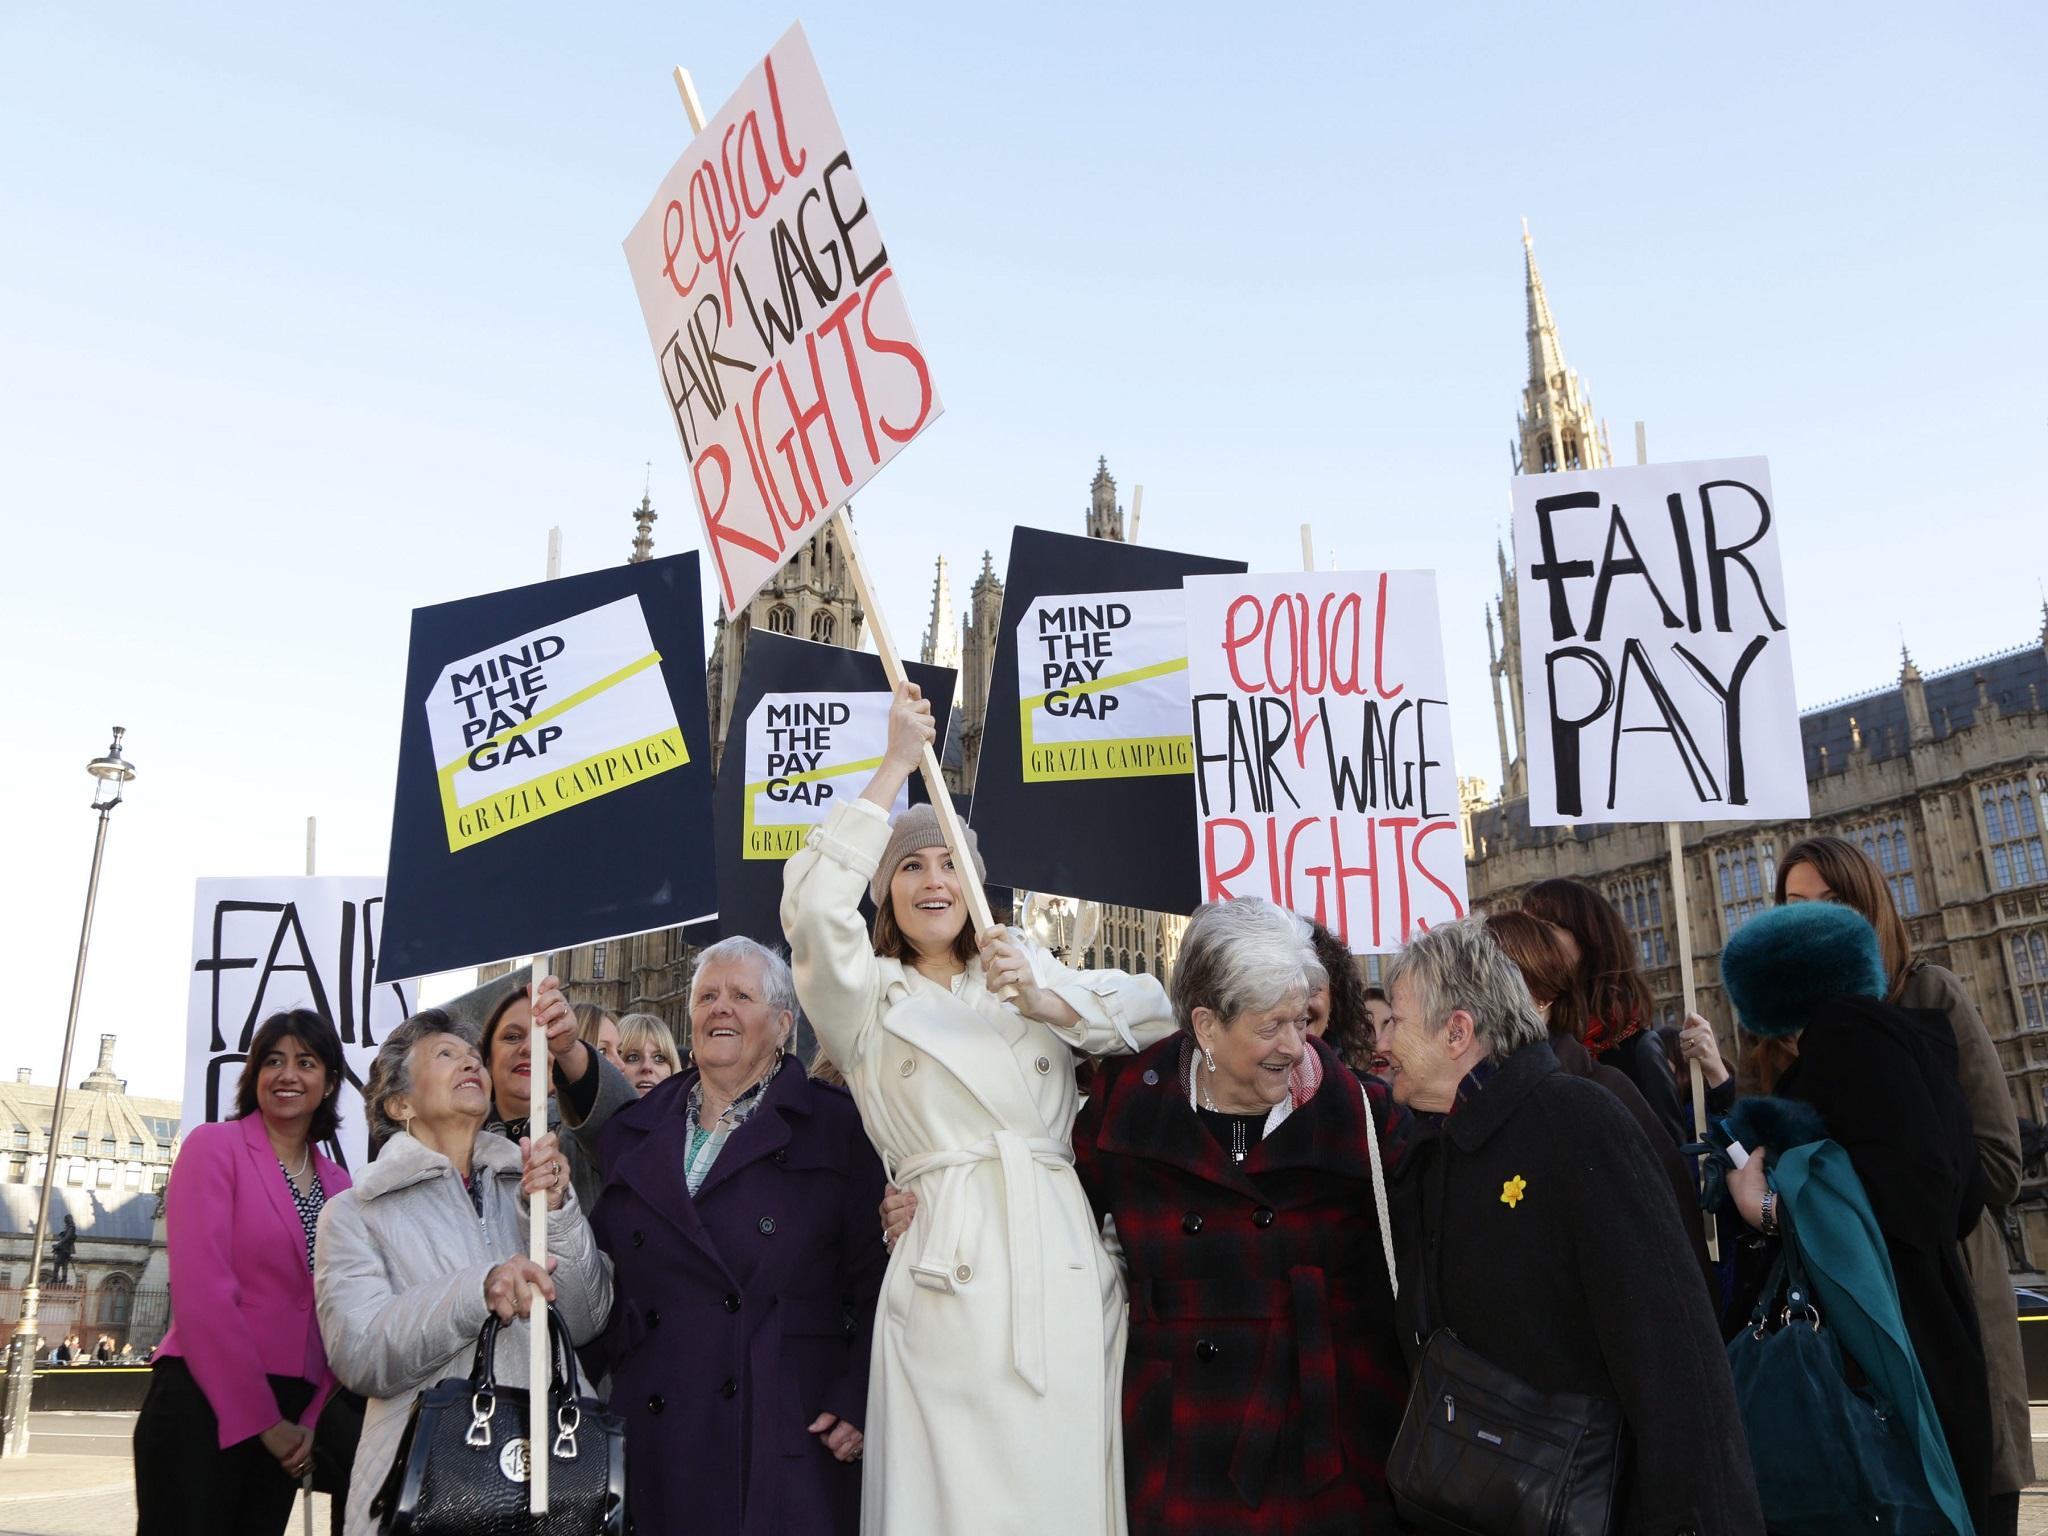 The cast of the musical ‘Made in Dagenham’ protest outside Parliament against the gender pay gap